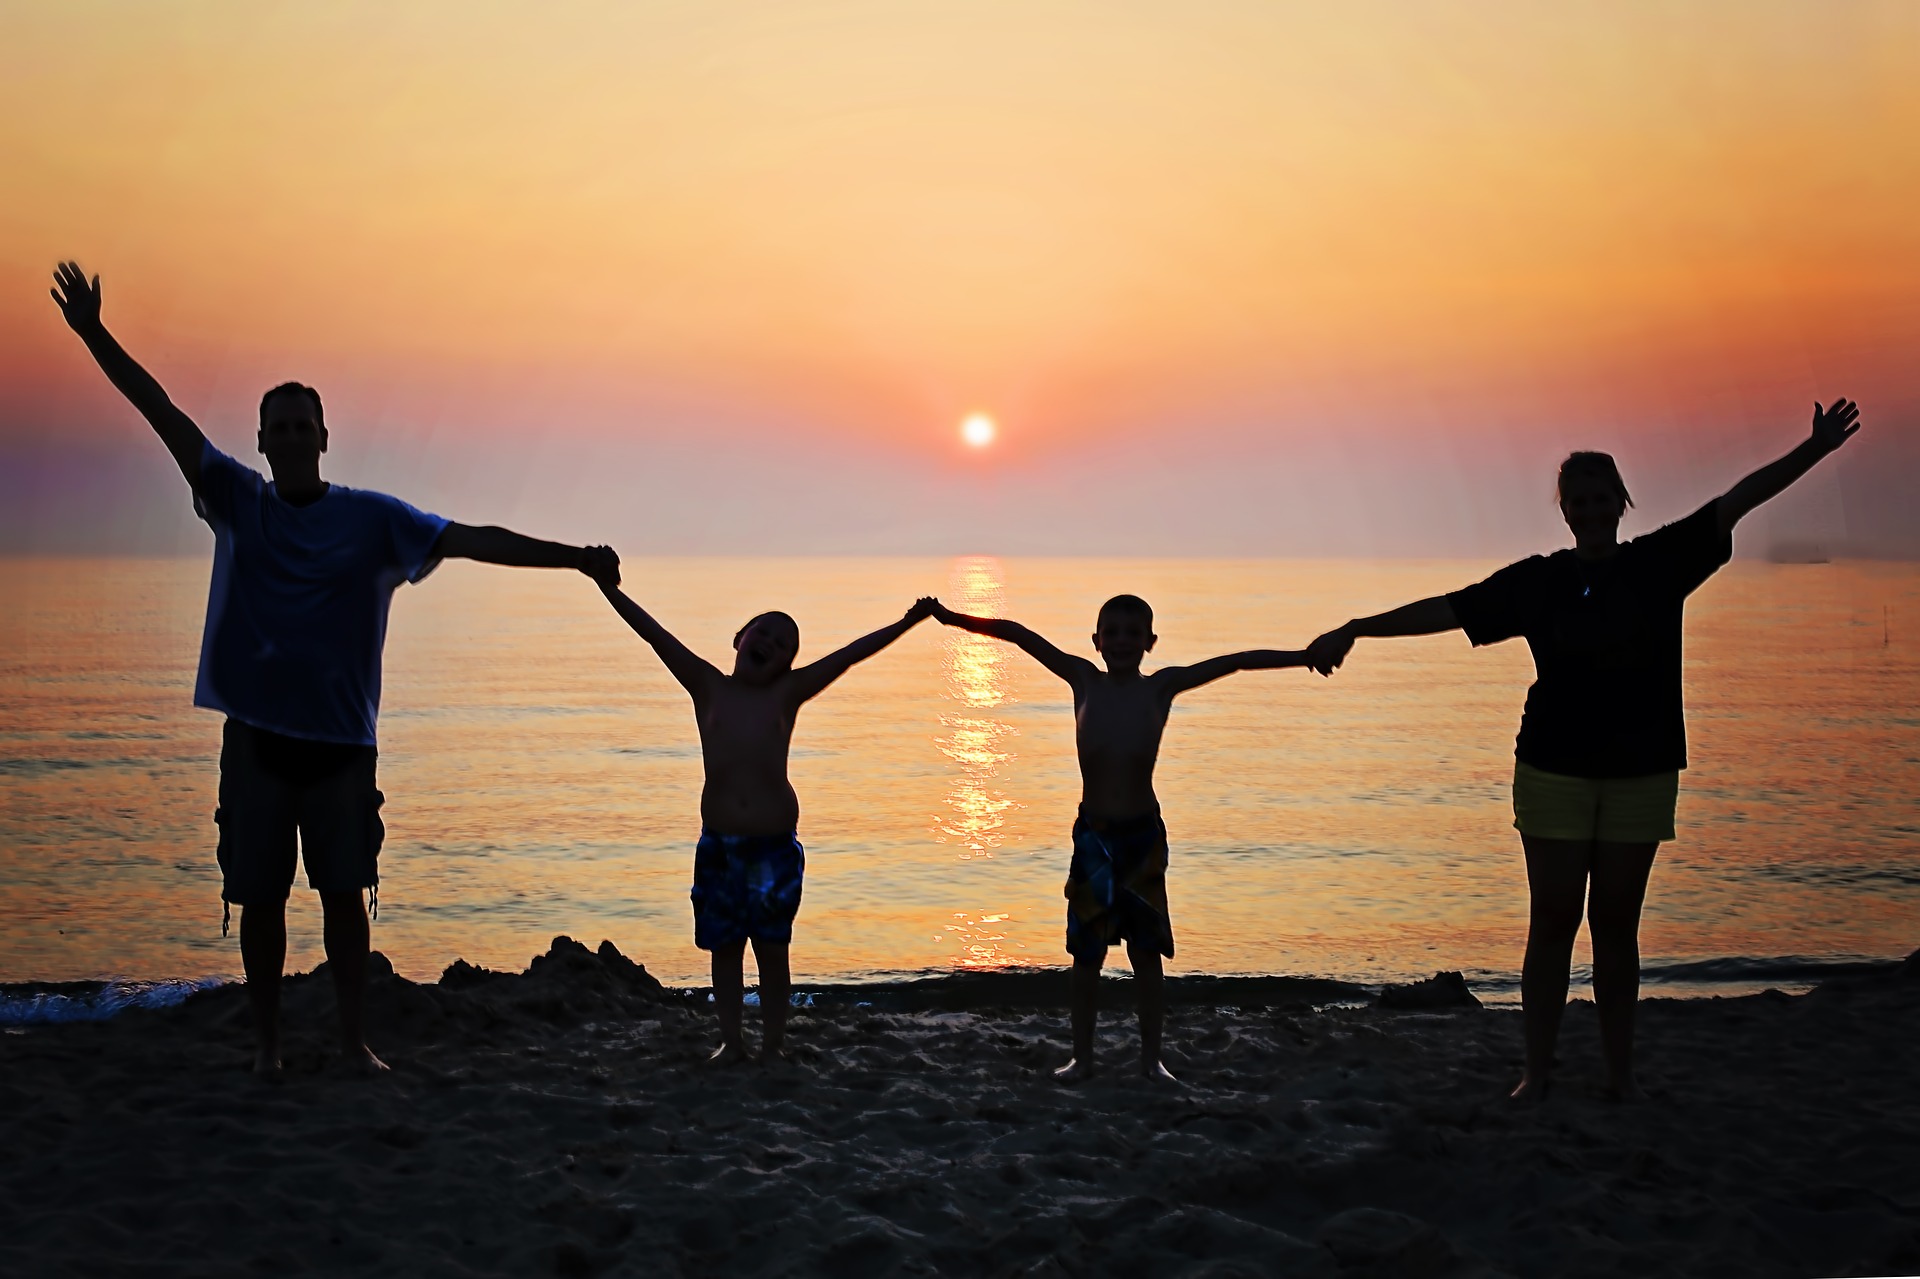 Family with arms raised, holding hands in front of ocean at sunset